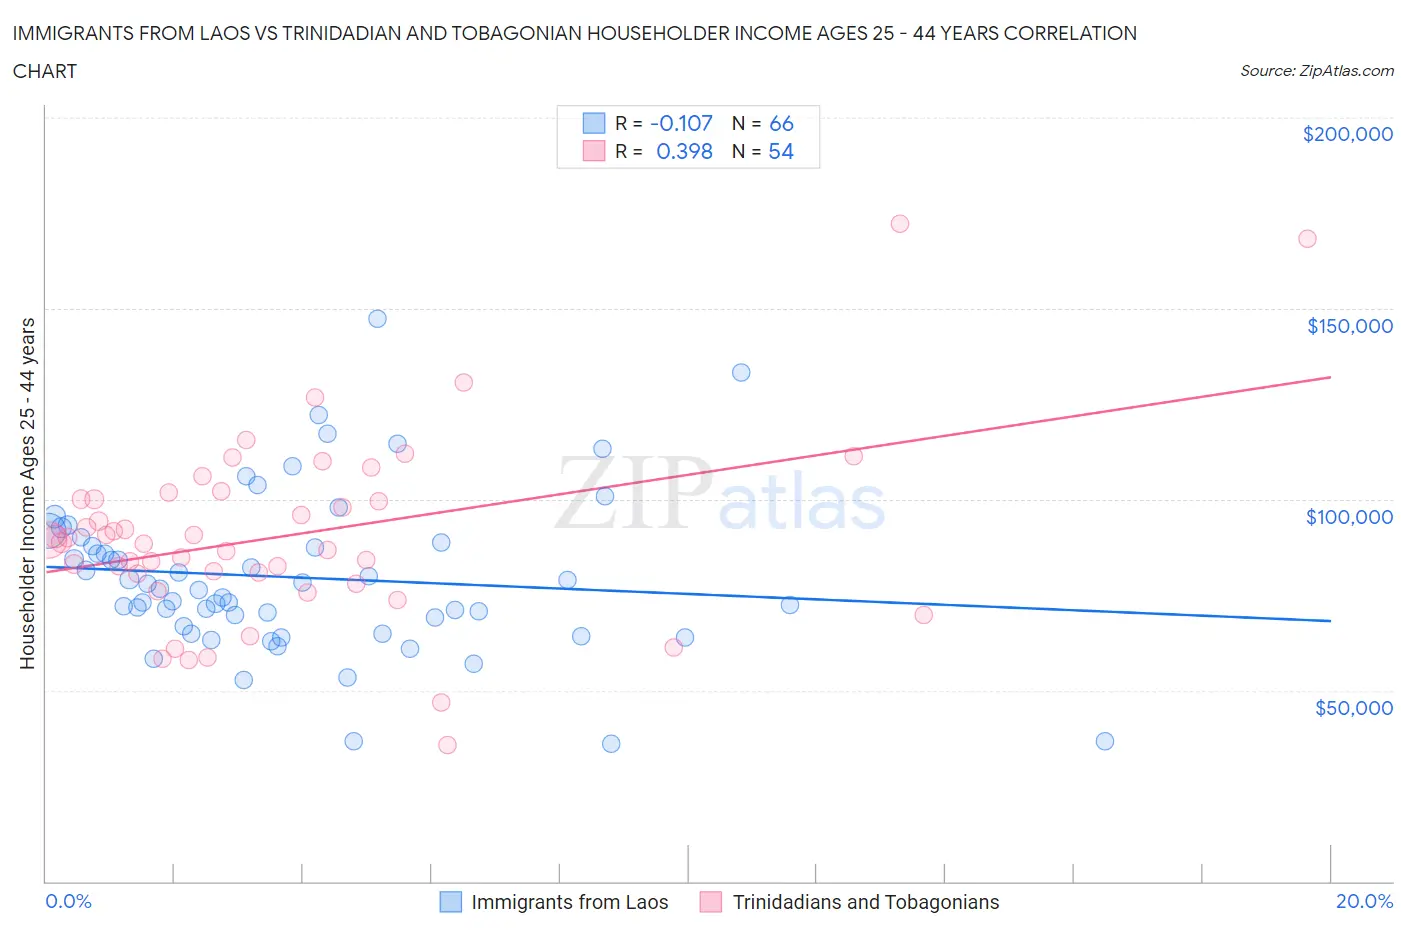 Immigrants from Laos vs Trinidadian and Tobagonian Householder Income Ages 25 - 44 years